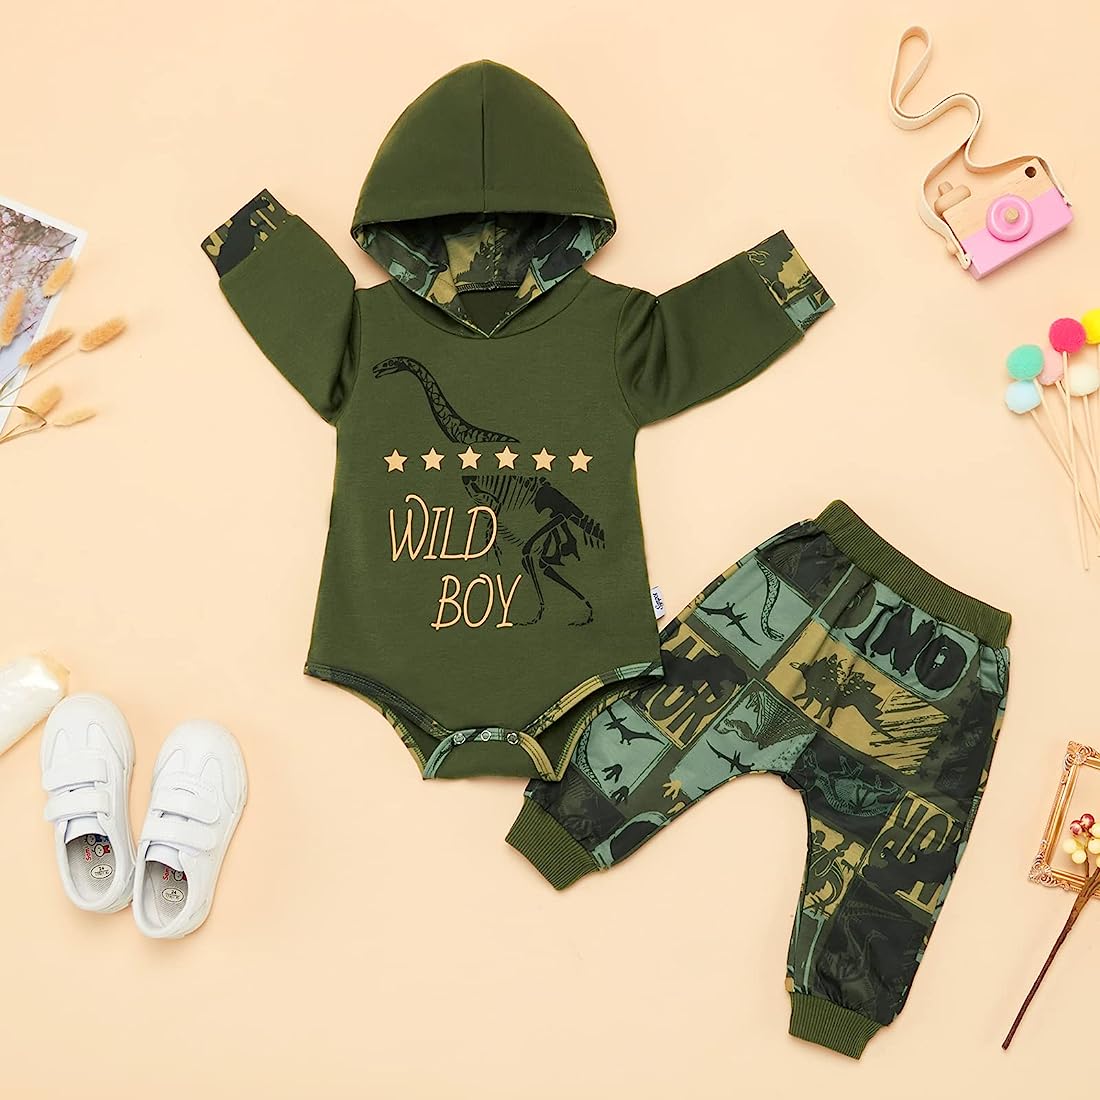 Newborn Infant Baby Boy Clothes Outfits 0-3-6-12 Months Little Boy Tops Suits Short Sleeve Pants Summer Toddler Baby Boy Romper Clothes Set: Clothing, Shoes & Jewelry